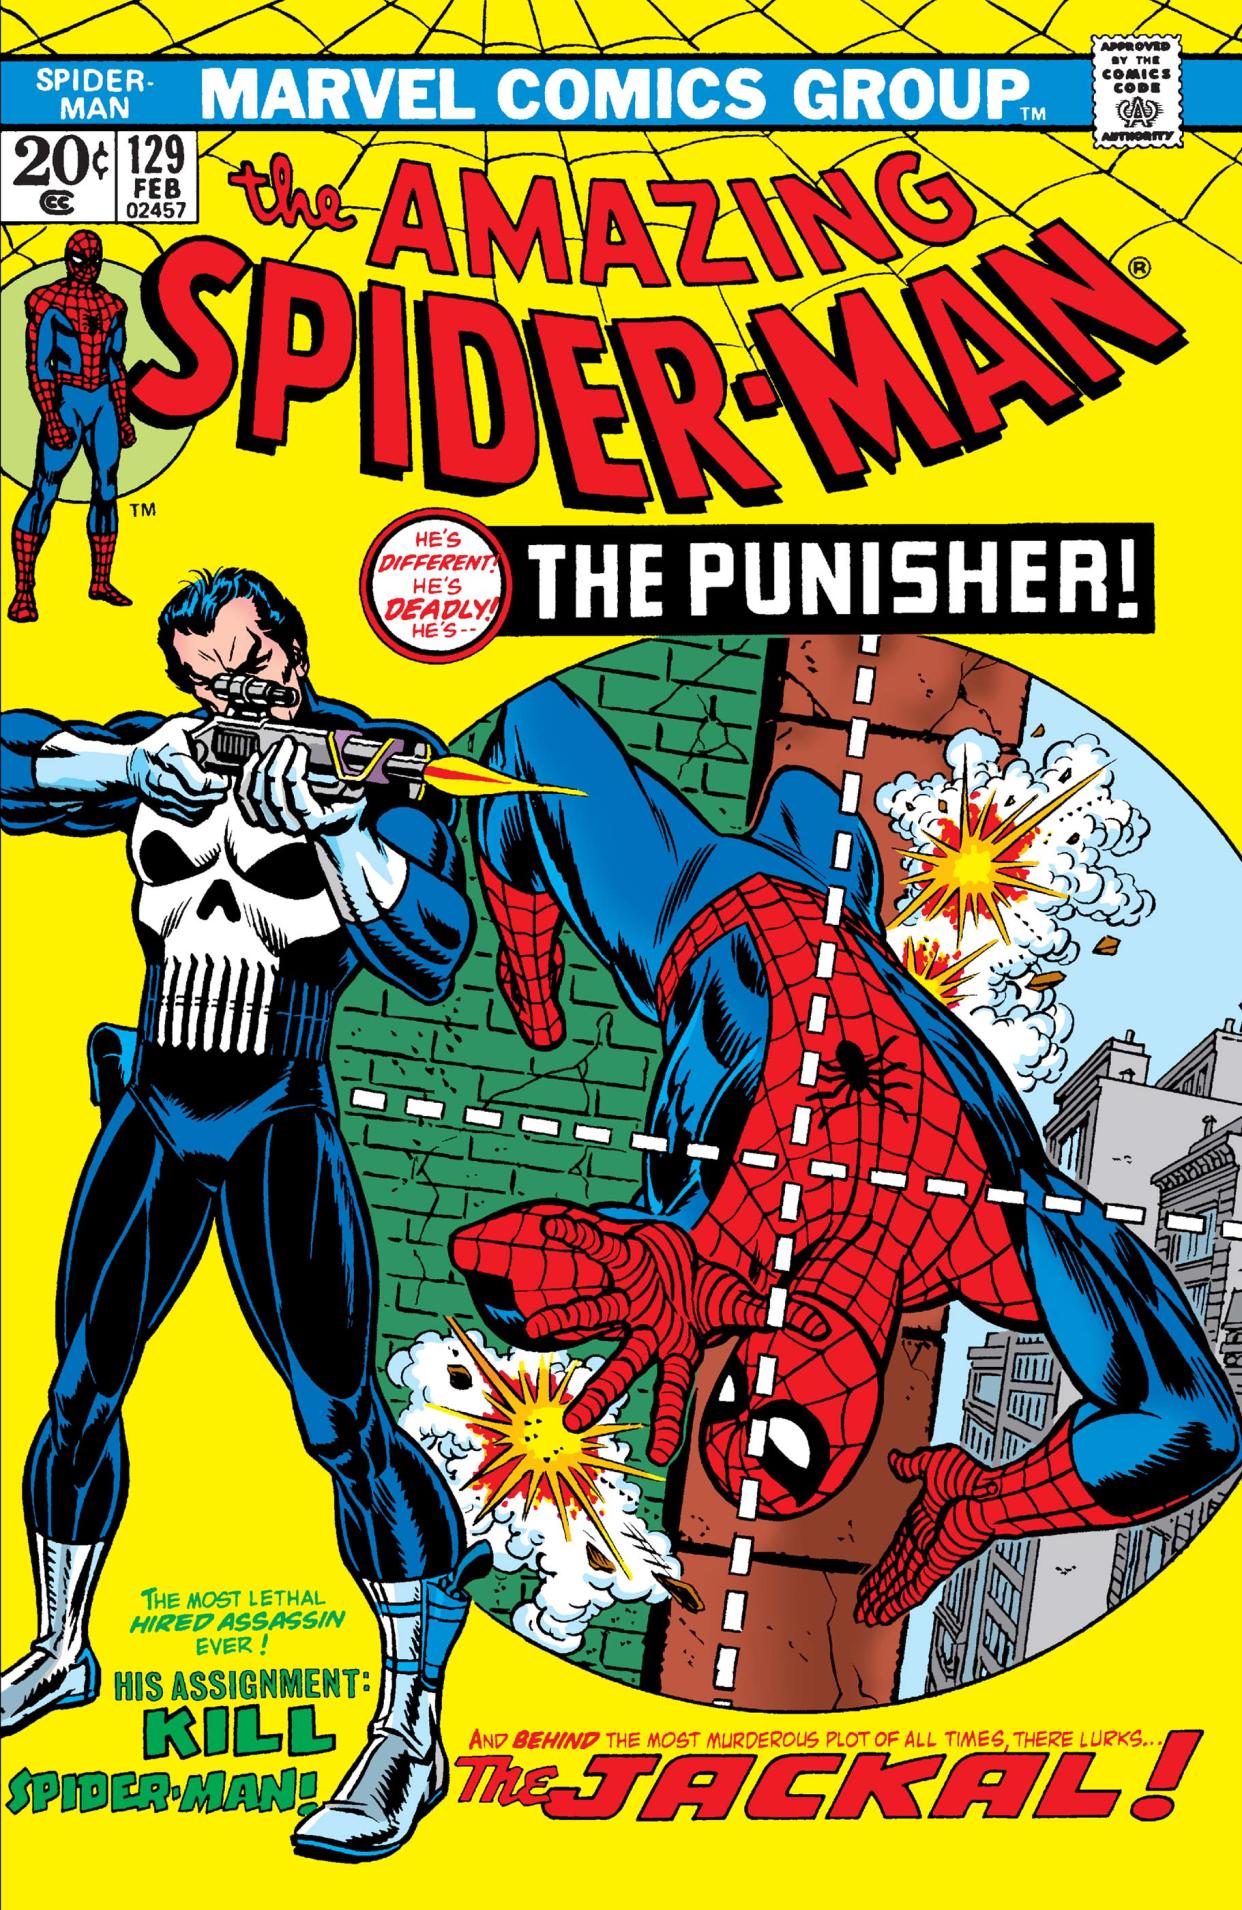 The Punisher made his first appearance in 'The Amazing Spider-Man' Issue #129 (Photo: Marvel) 